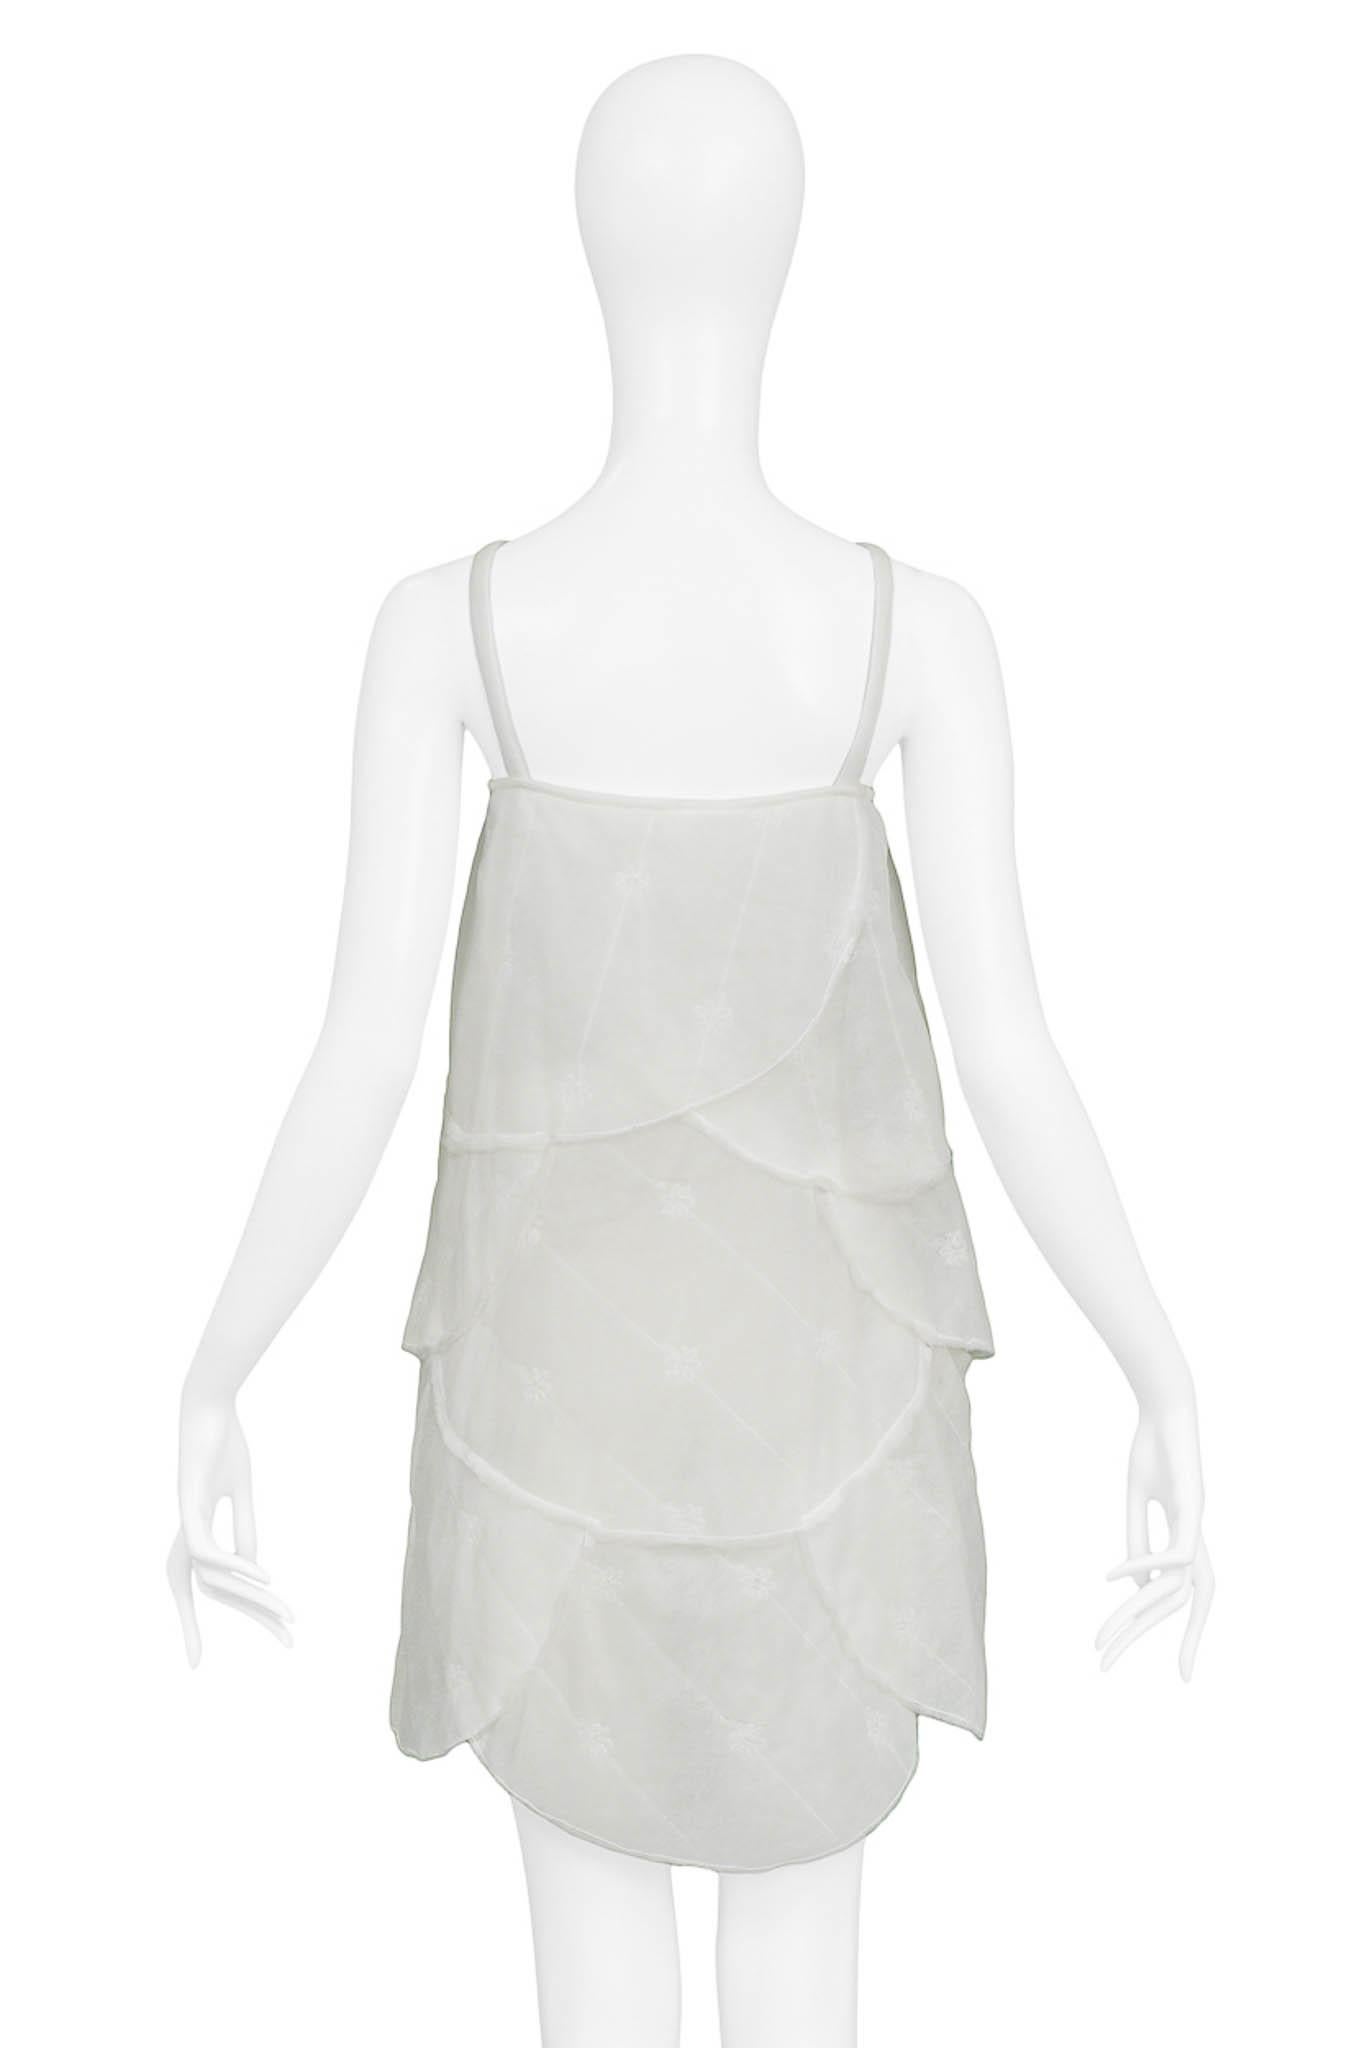 Walter Van Beirendonck White Padded Batting Dress 1999 In Good Condition For Sale In Los Angeles, CA